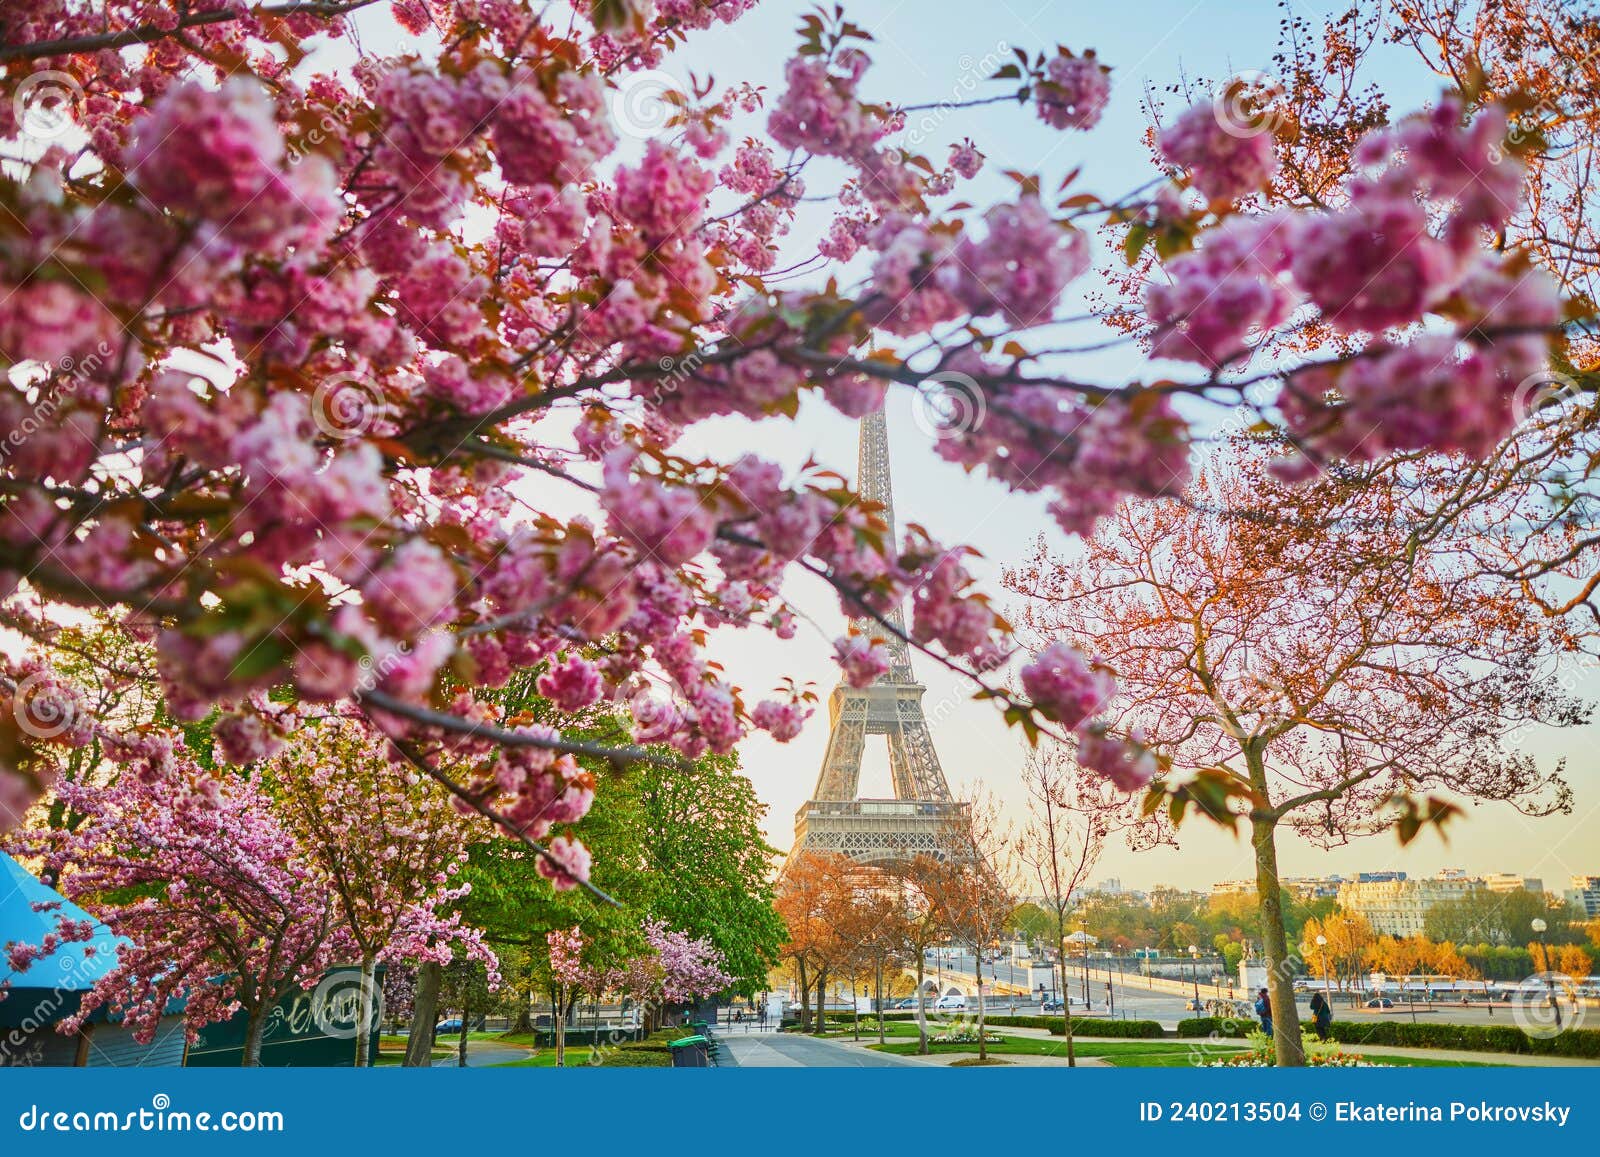 Scenic View of the Eiffel Tower with Cherry Blossom Trees in Bloom in